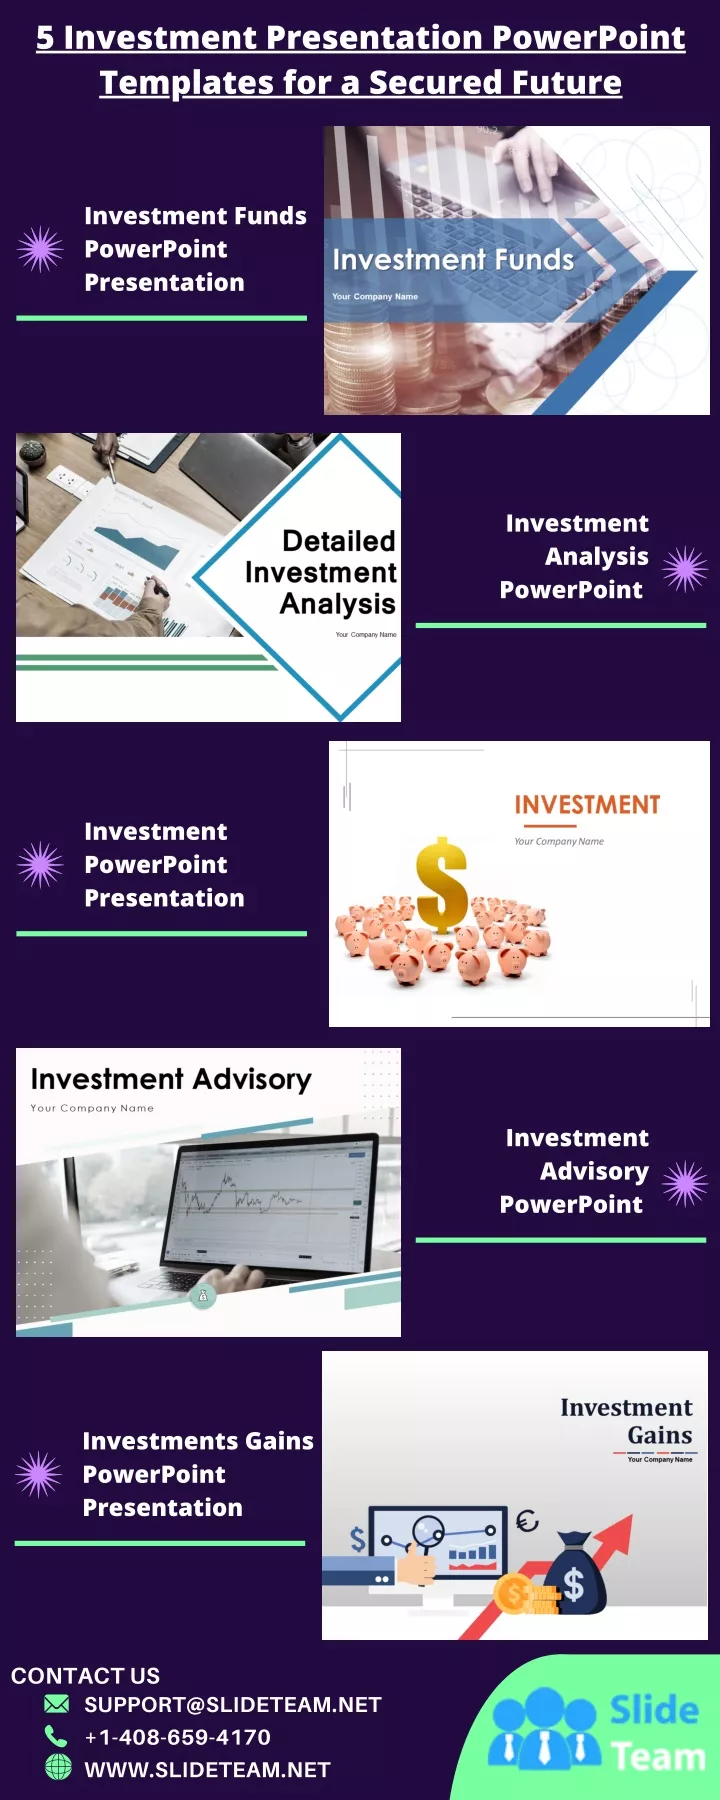 5 investment presentation powerpoint templates